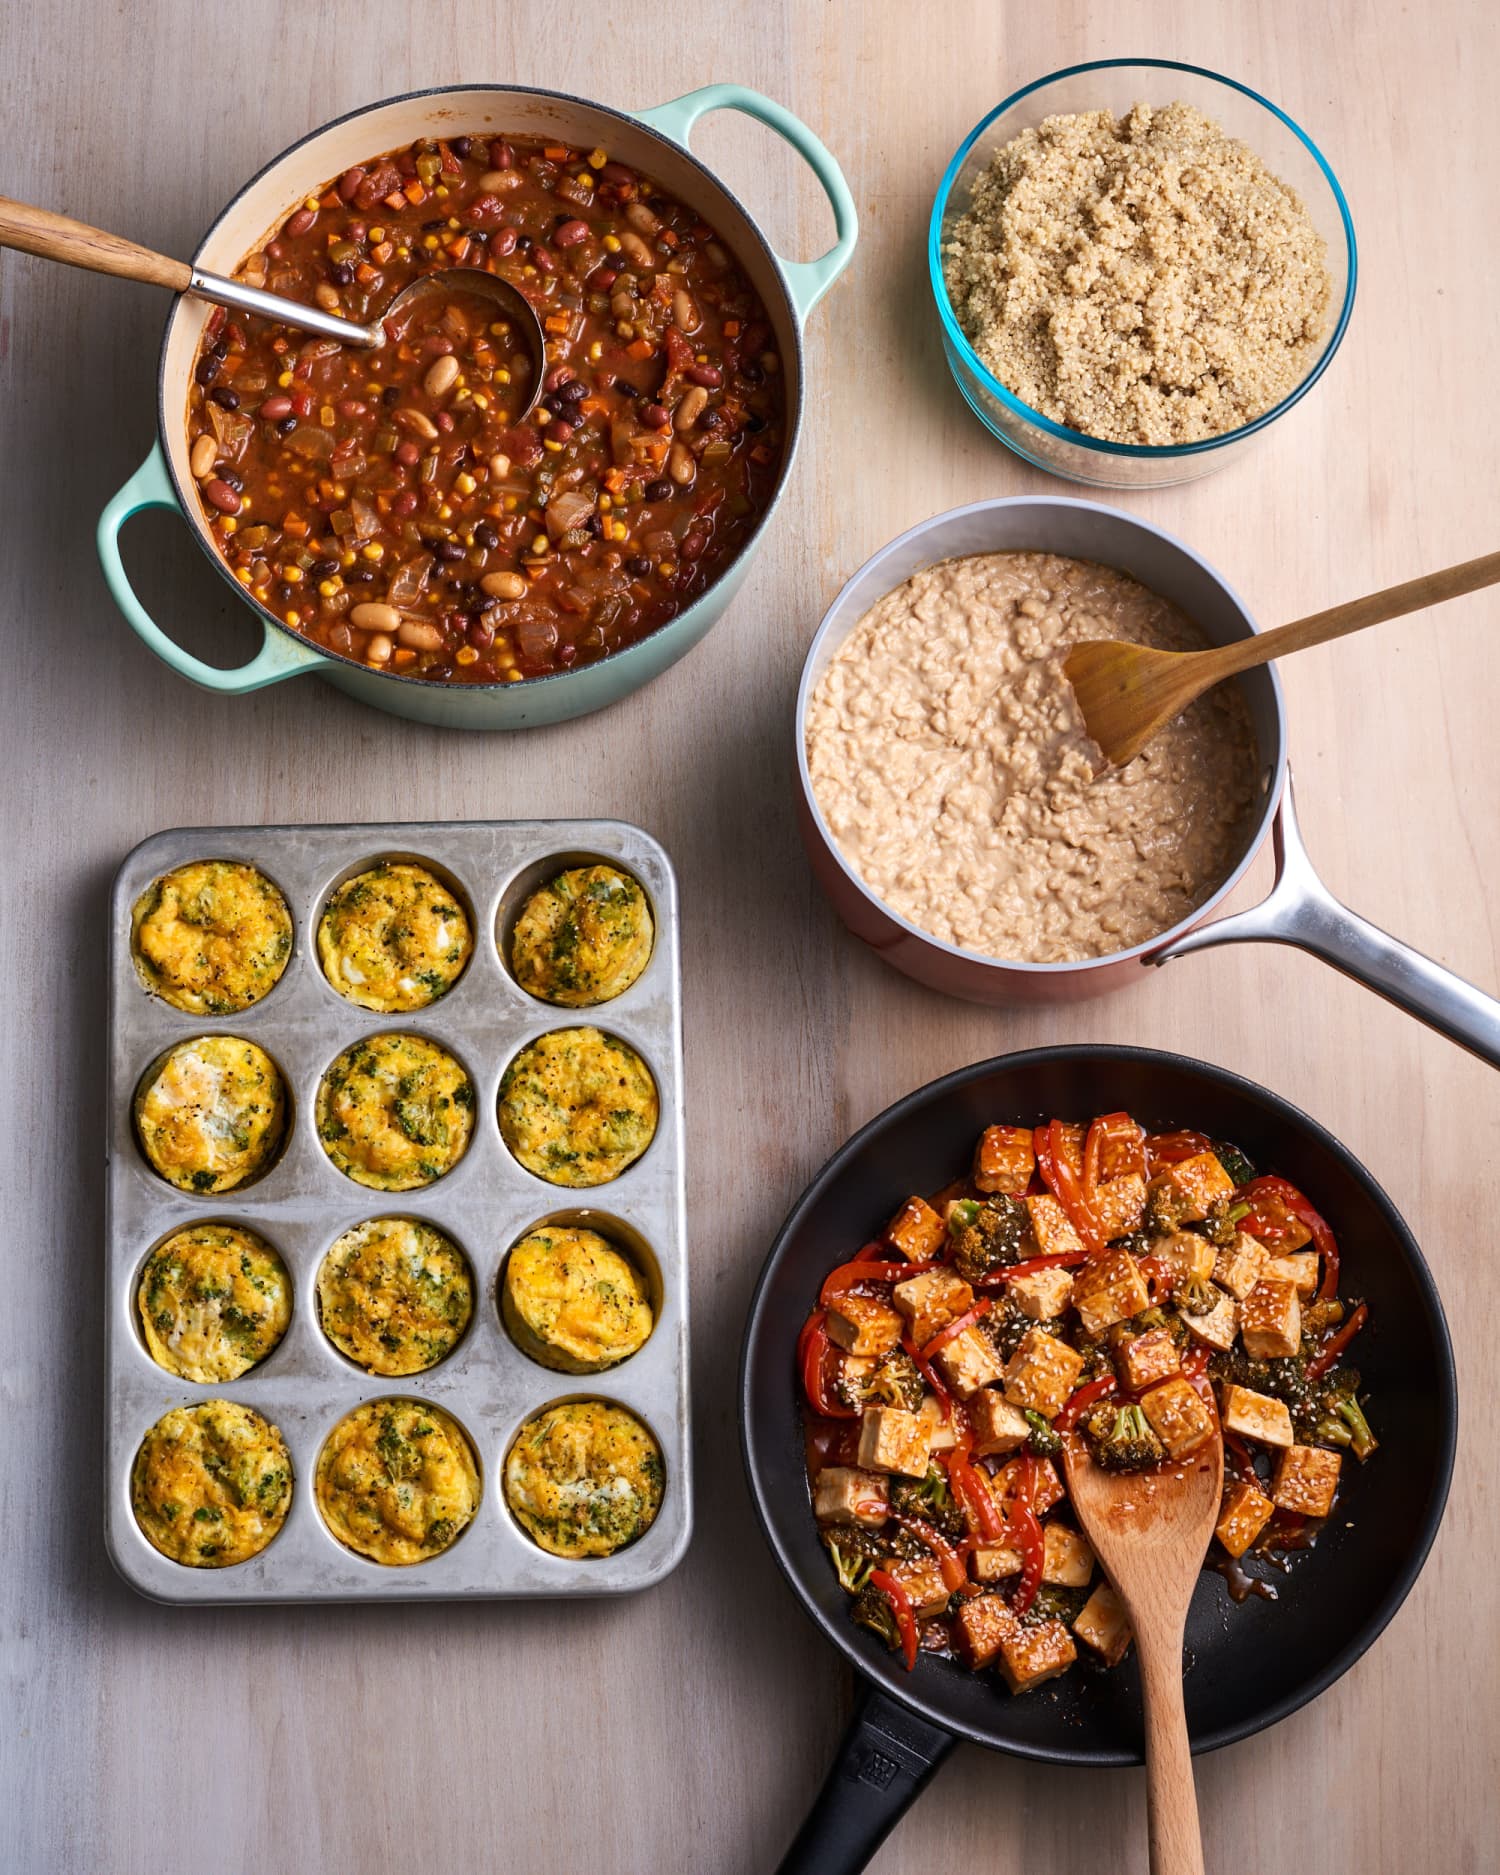 How I Prep a Week of High-Protein Vegetarian Breakfasts, Lunches, and Dinners in Just 2 Hours